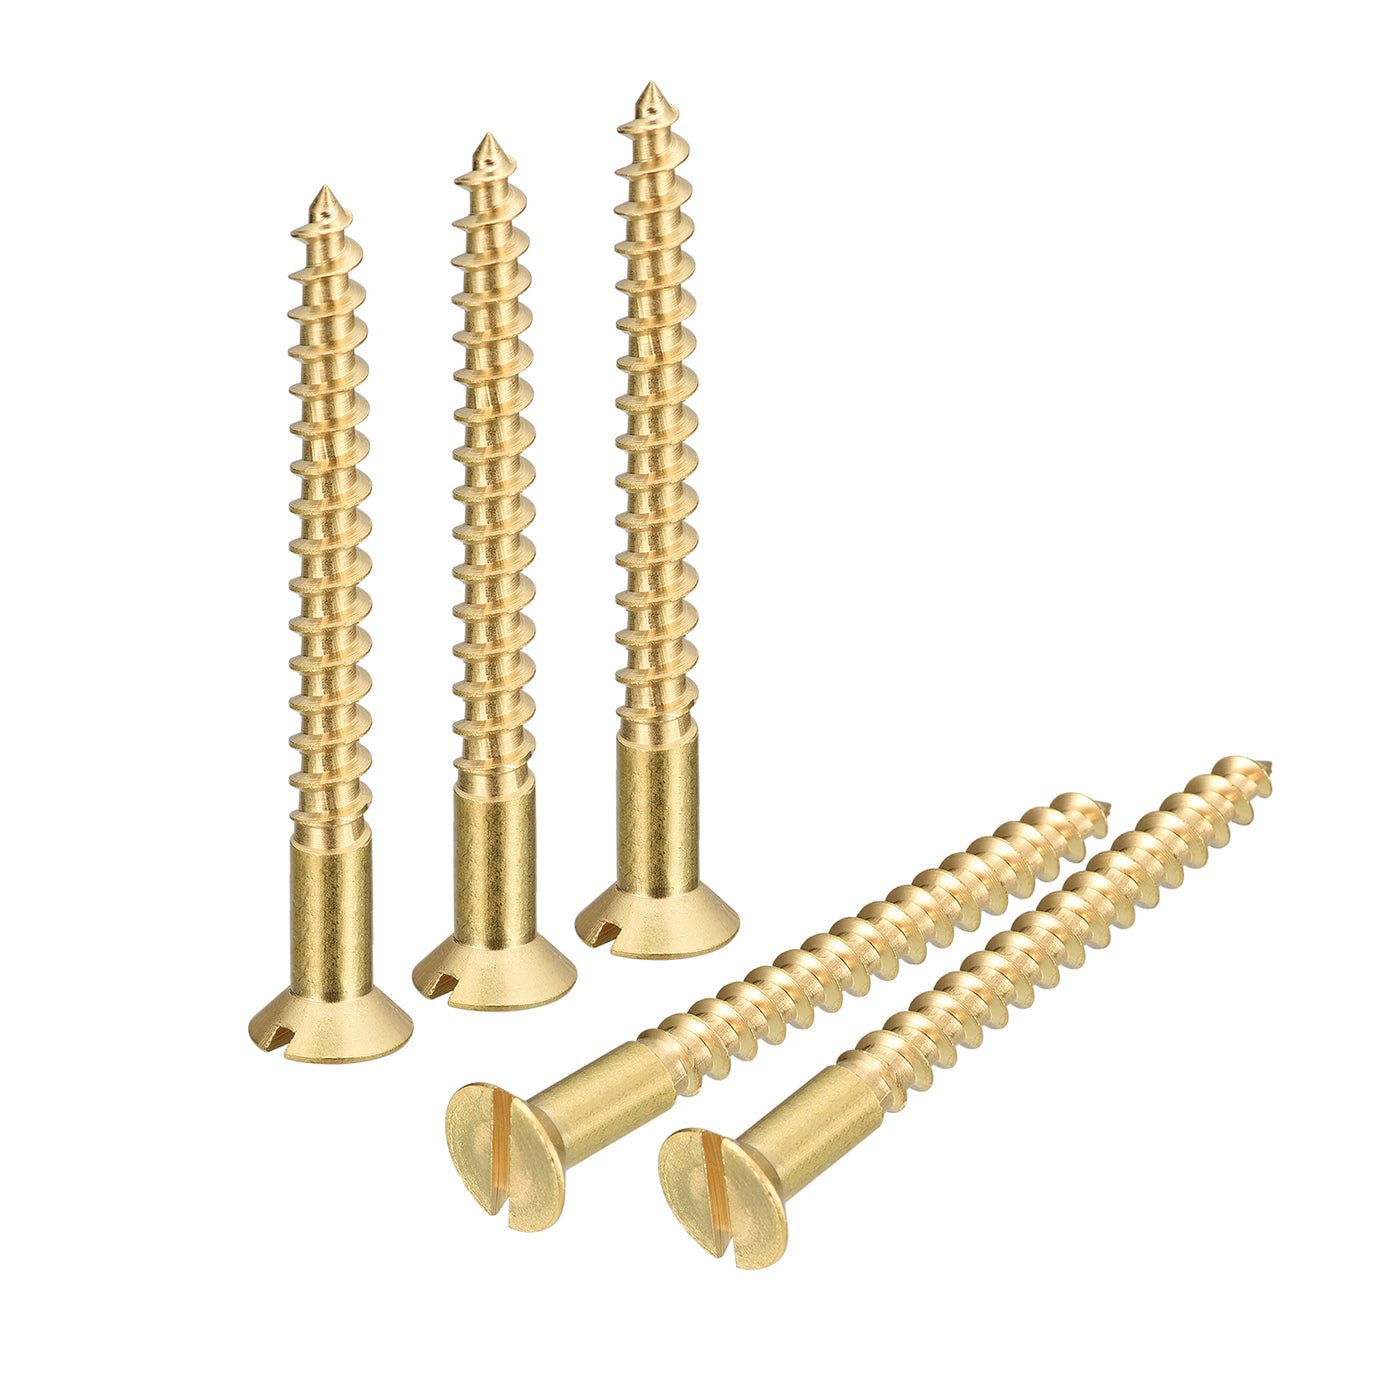 uxcell Uxcell 50Pcs M5 x 50mm Brass Slotted Drive Flat Head Wood Screws Self Tapping Screw